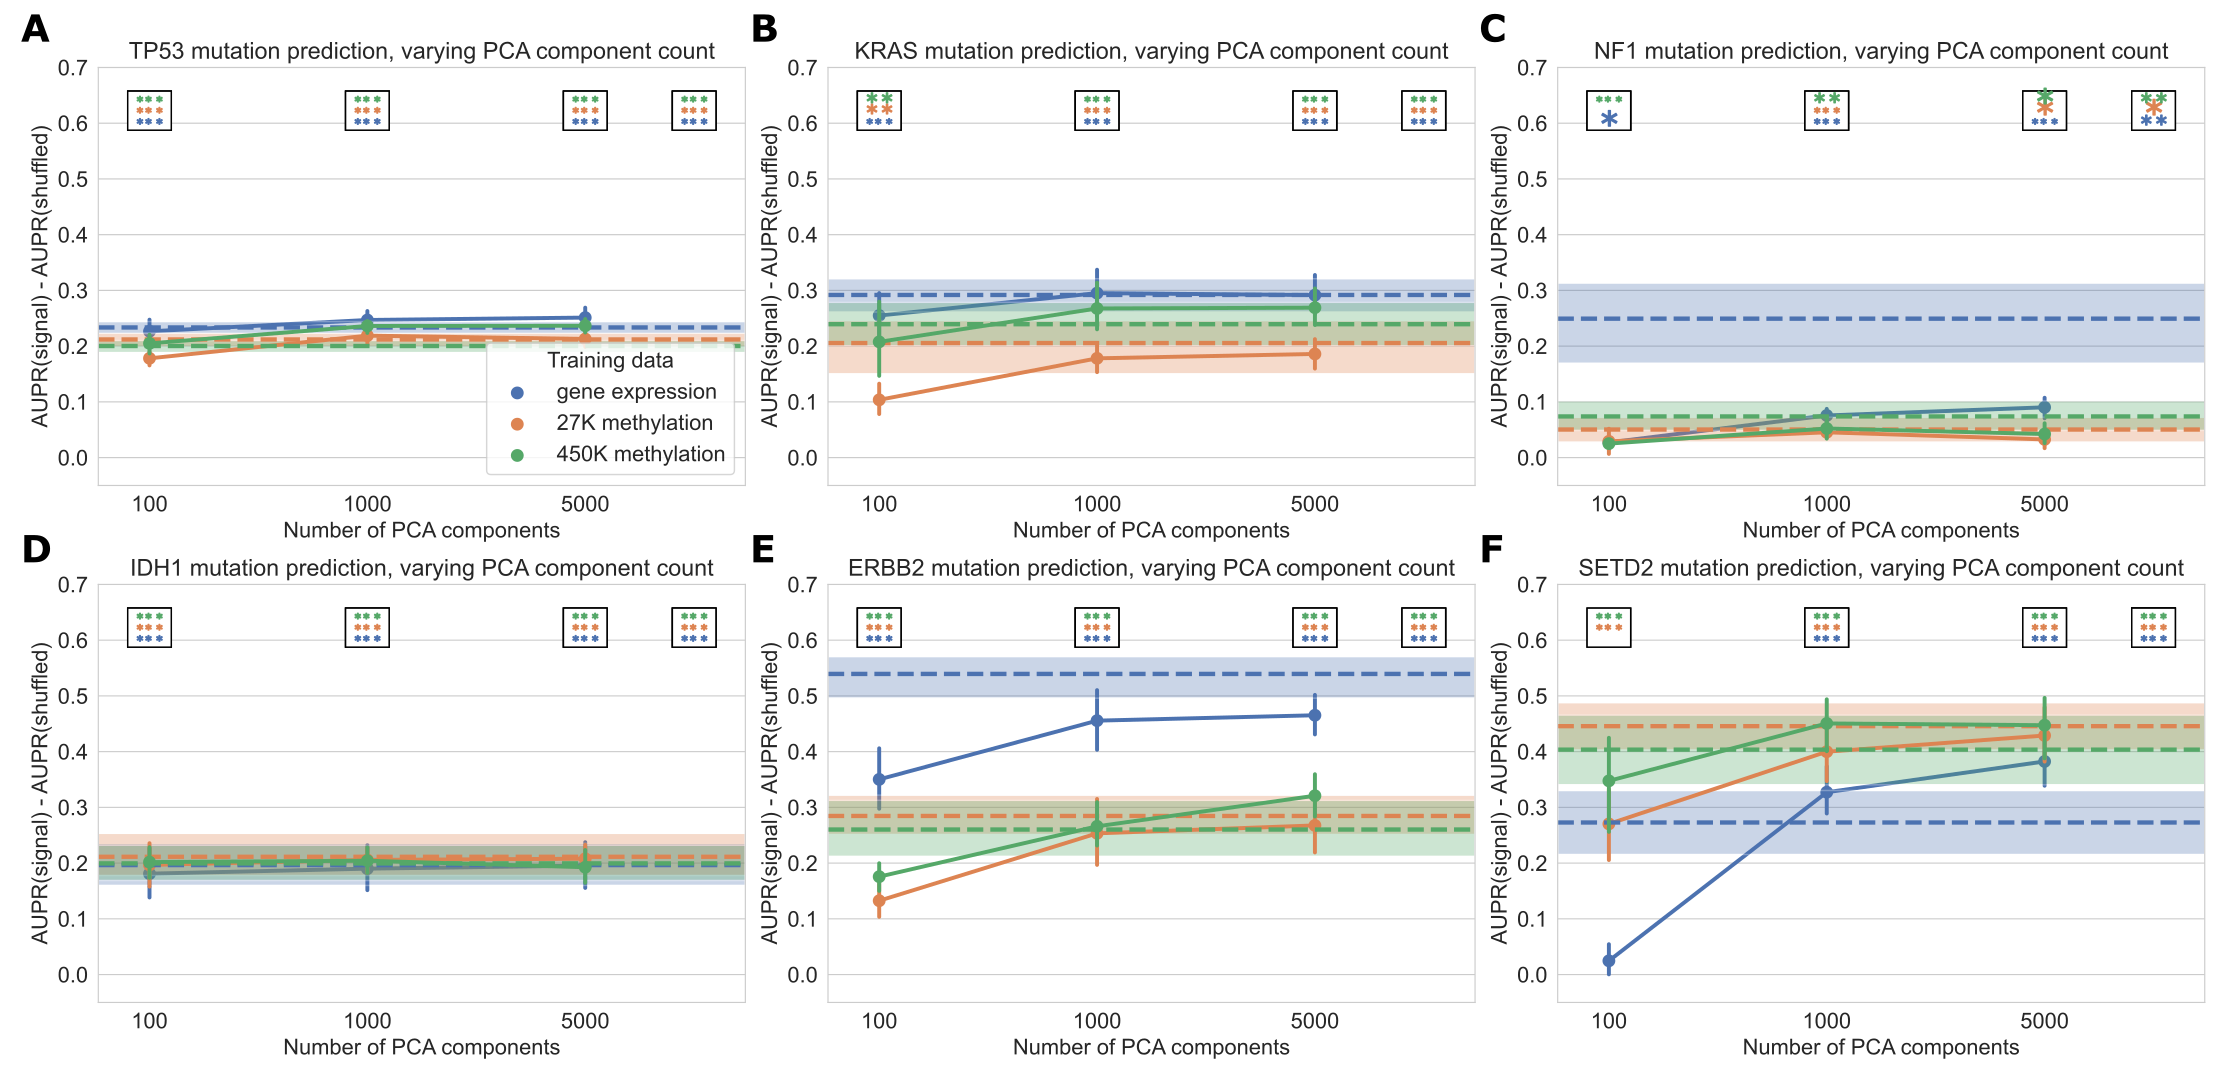 Figure 4: Performance across varying PCA dimensions for specific genes of interest. Dotted lines represent results for “raw” features (8,000 gene features for gene expression data and 8,000 CpG probes for both methylation datasets, selected by largest mean absolute deviation). Error bars and shaded regions show bootstrapped 95% confidence intervals. Stars in boxes show statistical testing results compared with permuted baseline model; each box refers to the model using the number of PCA components it is over (far right box = models with raw features). **: p < 0.01, ***: p < 0.001, no stars: not statistically significant for a cutoff of p = 0.05.